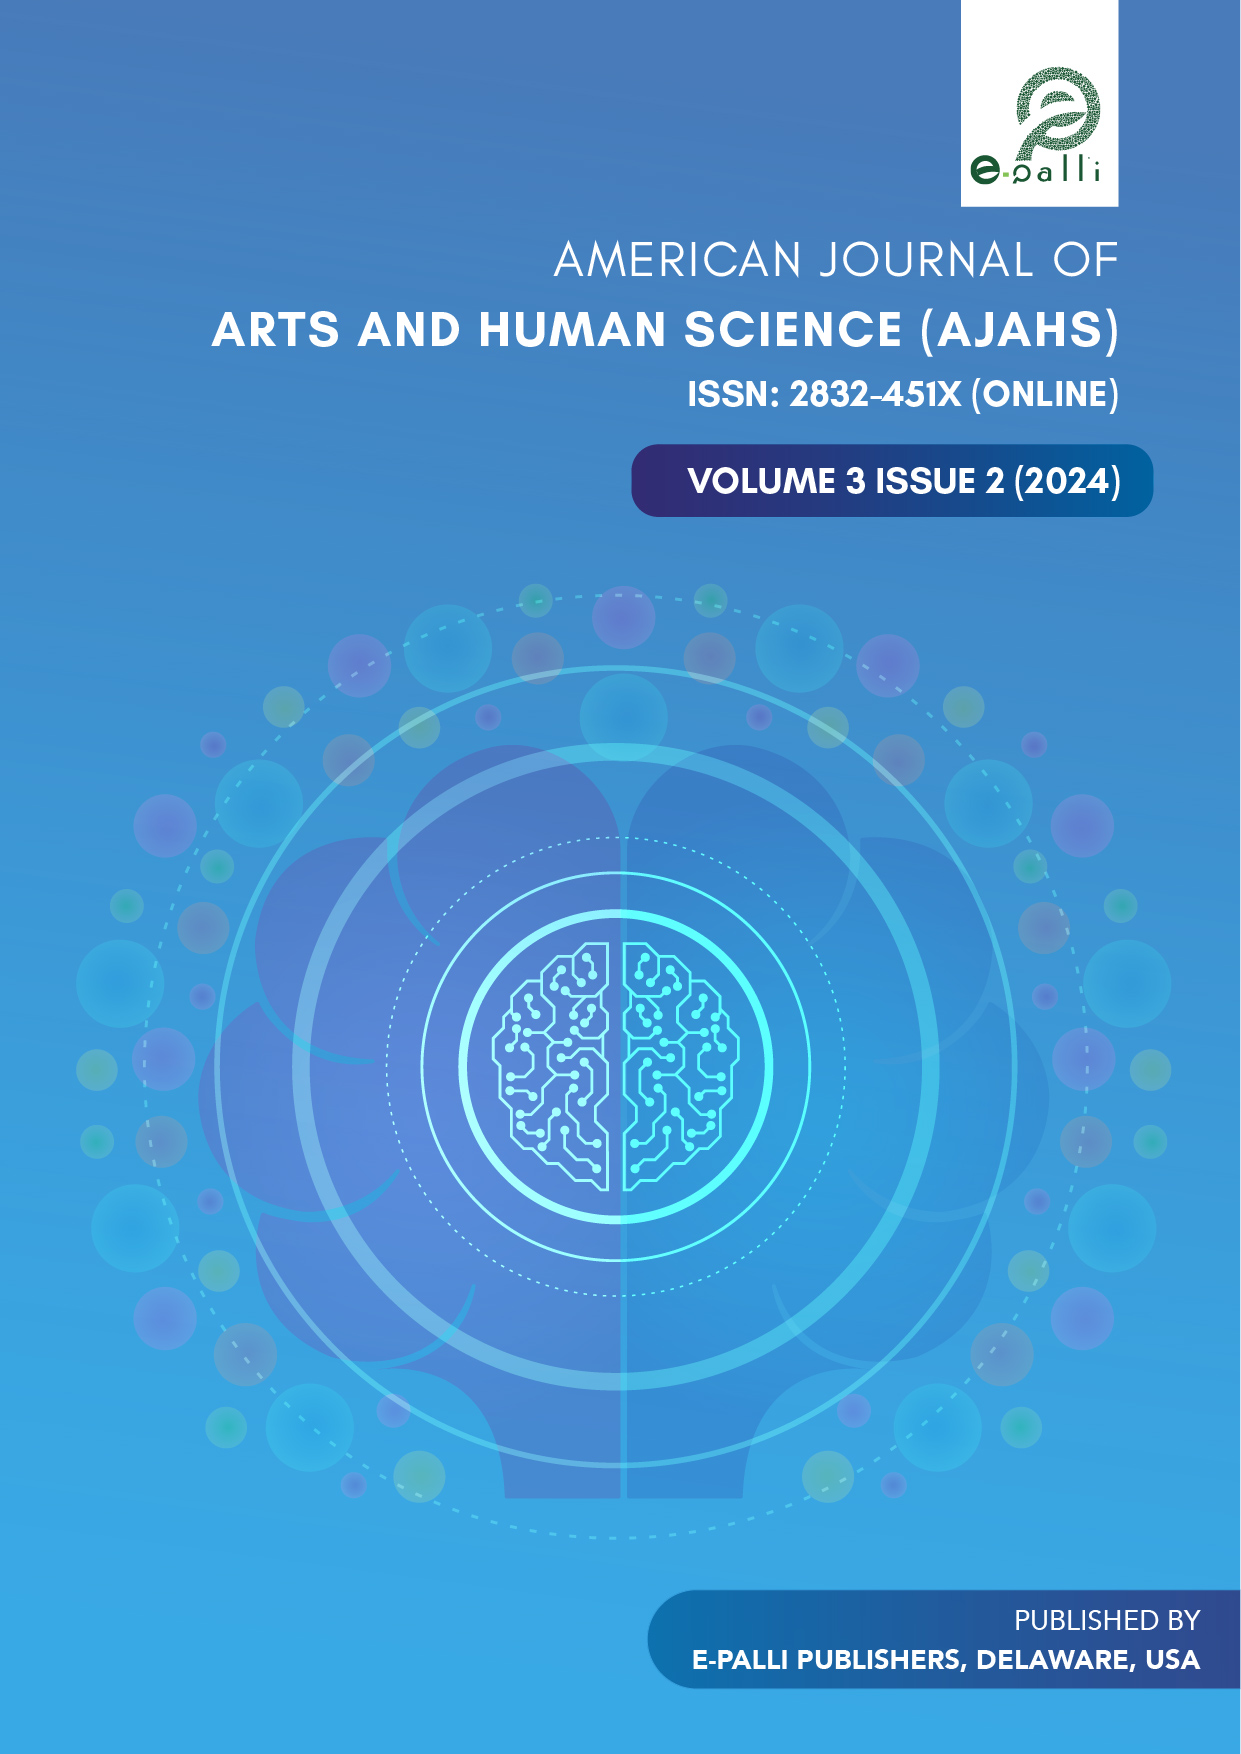                     View Vol. 3 No. 2 (2024): American Journal of Arts and Human Science
                